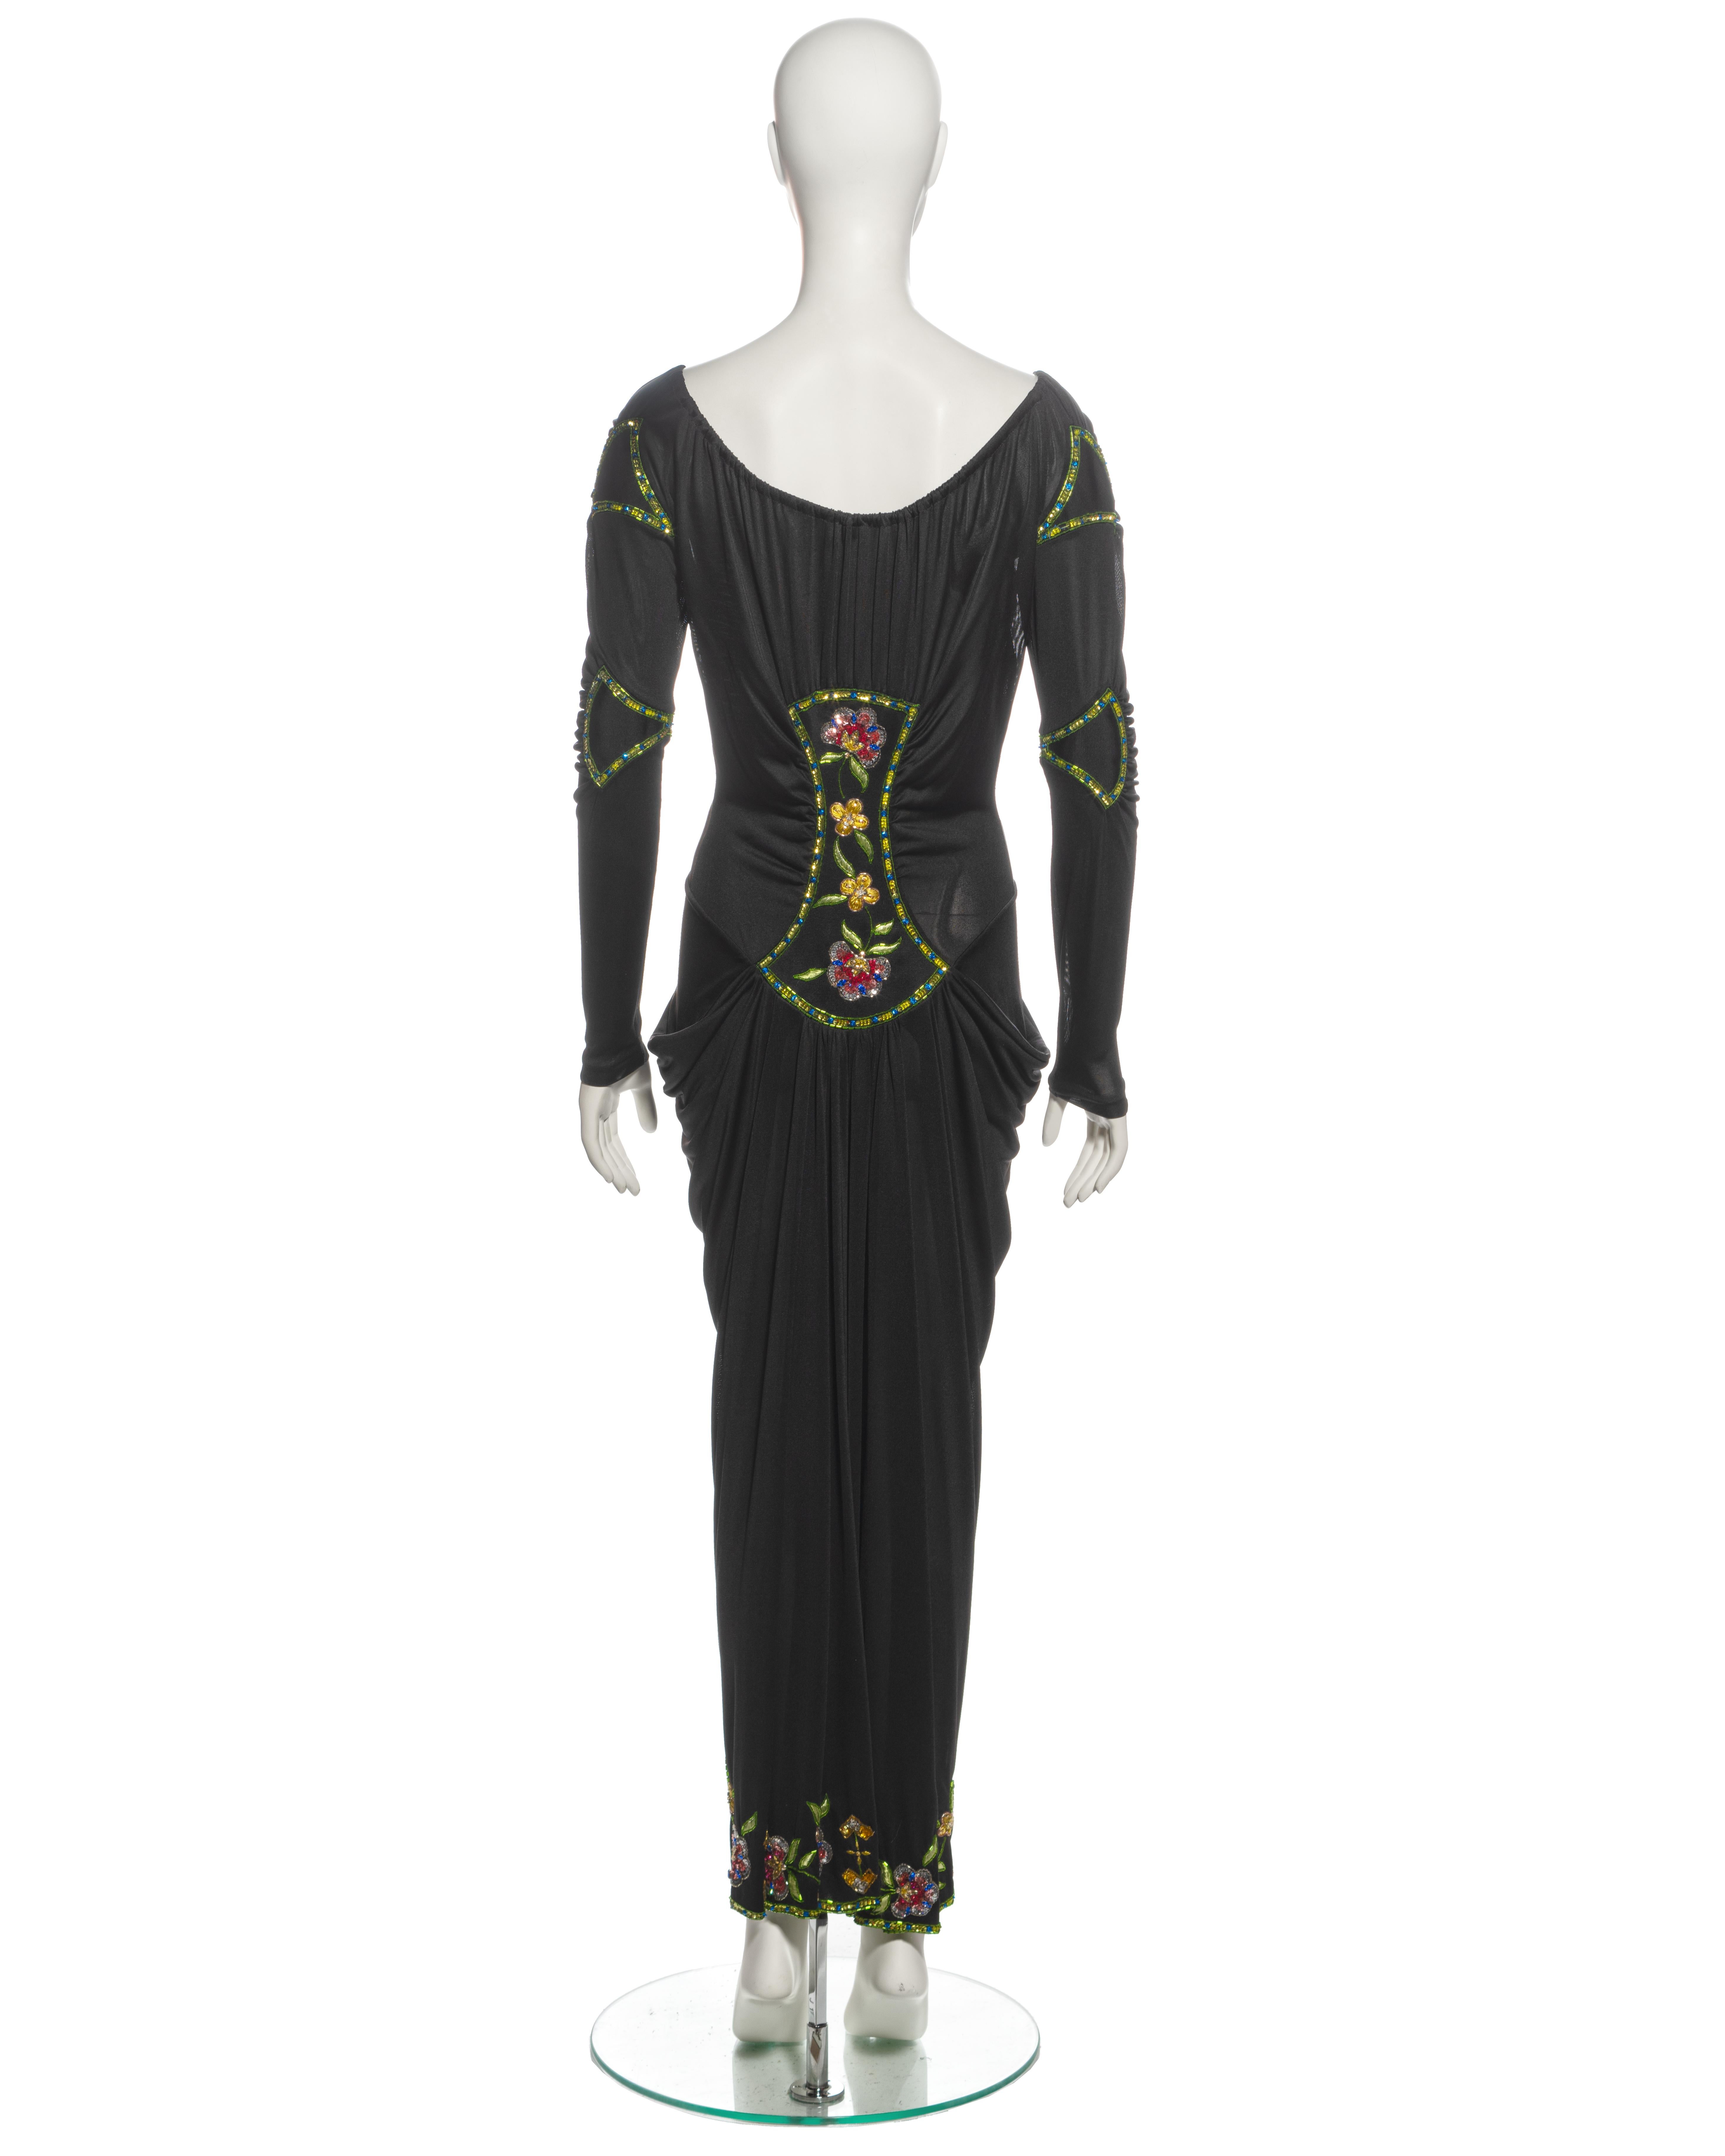 Christian Dior by John Galliano Black Viscose Embellished Draped Dress, ss 2002 For Sale 9